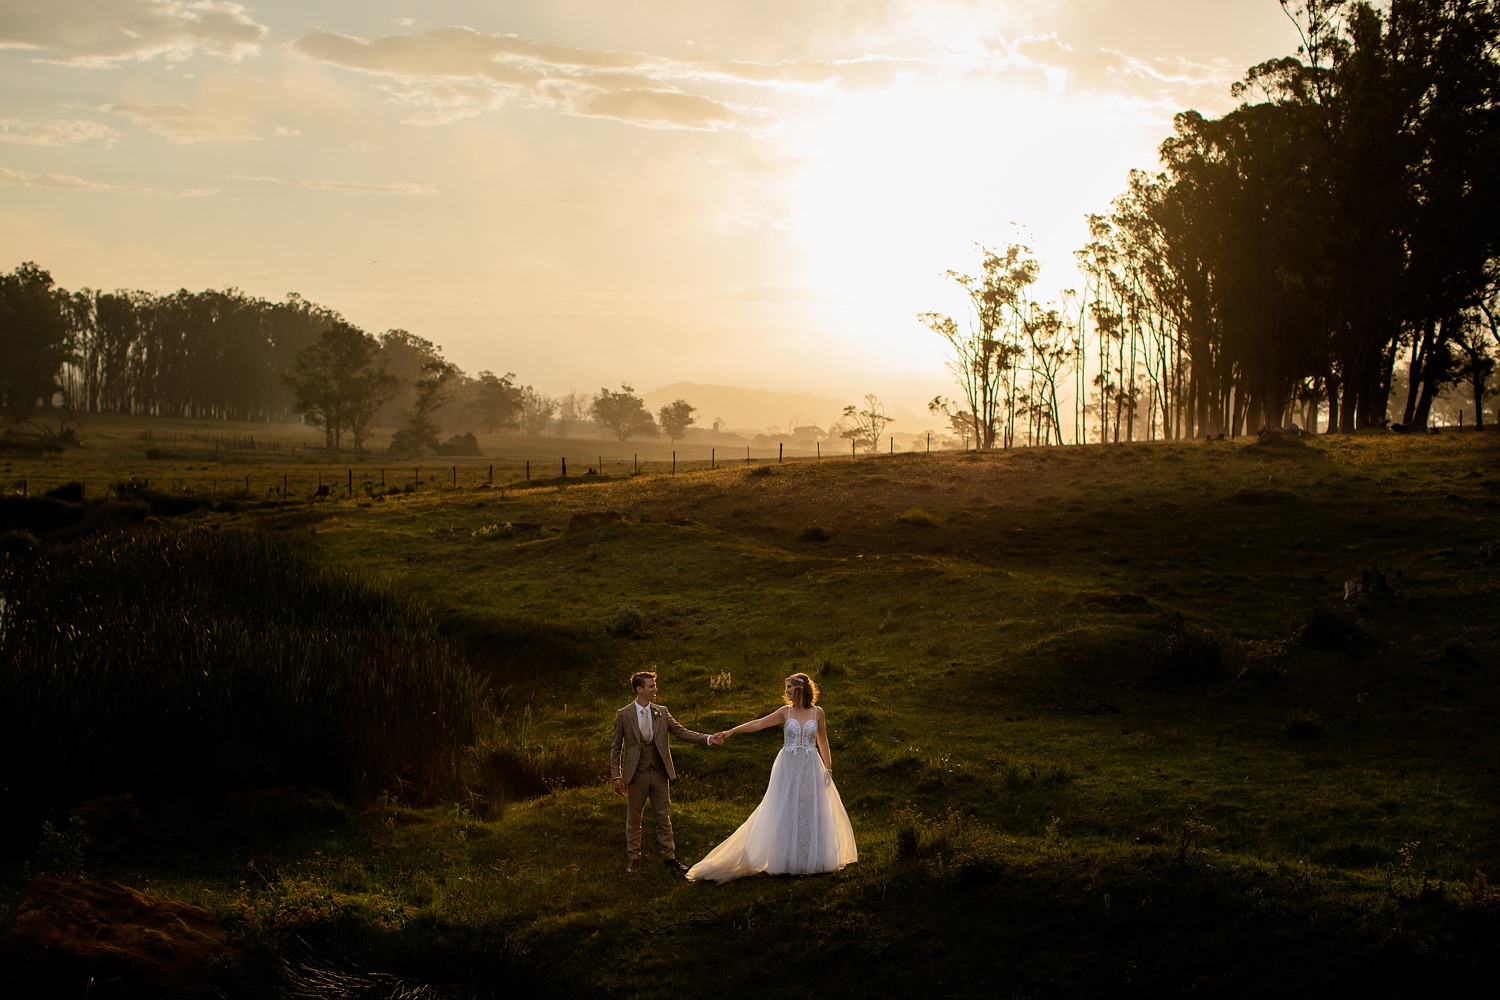 The bride and groom holds hands as the sun sets behind them, illuminating them on the darker landscape